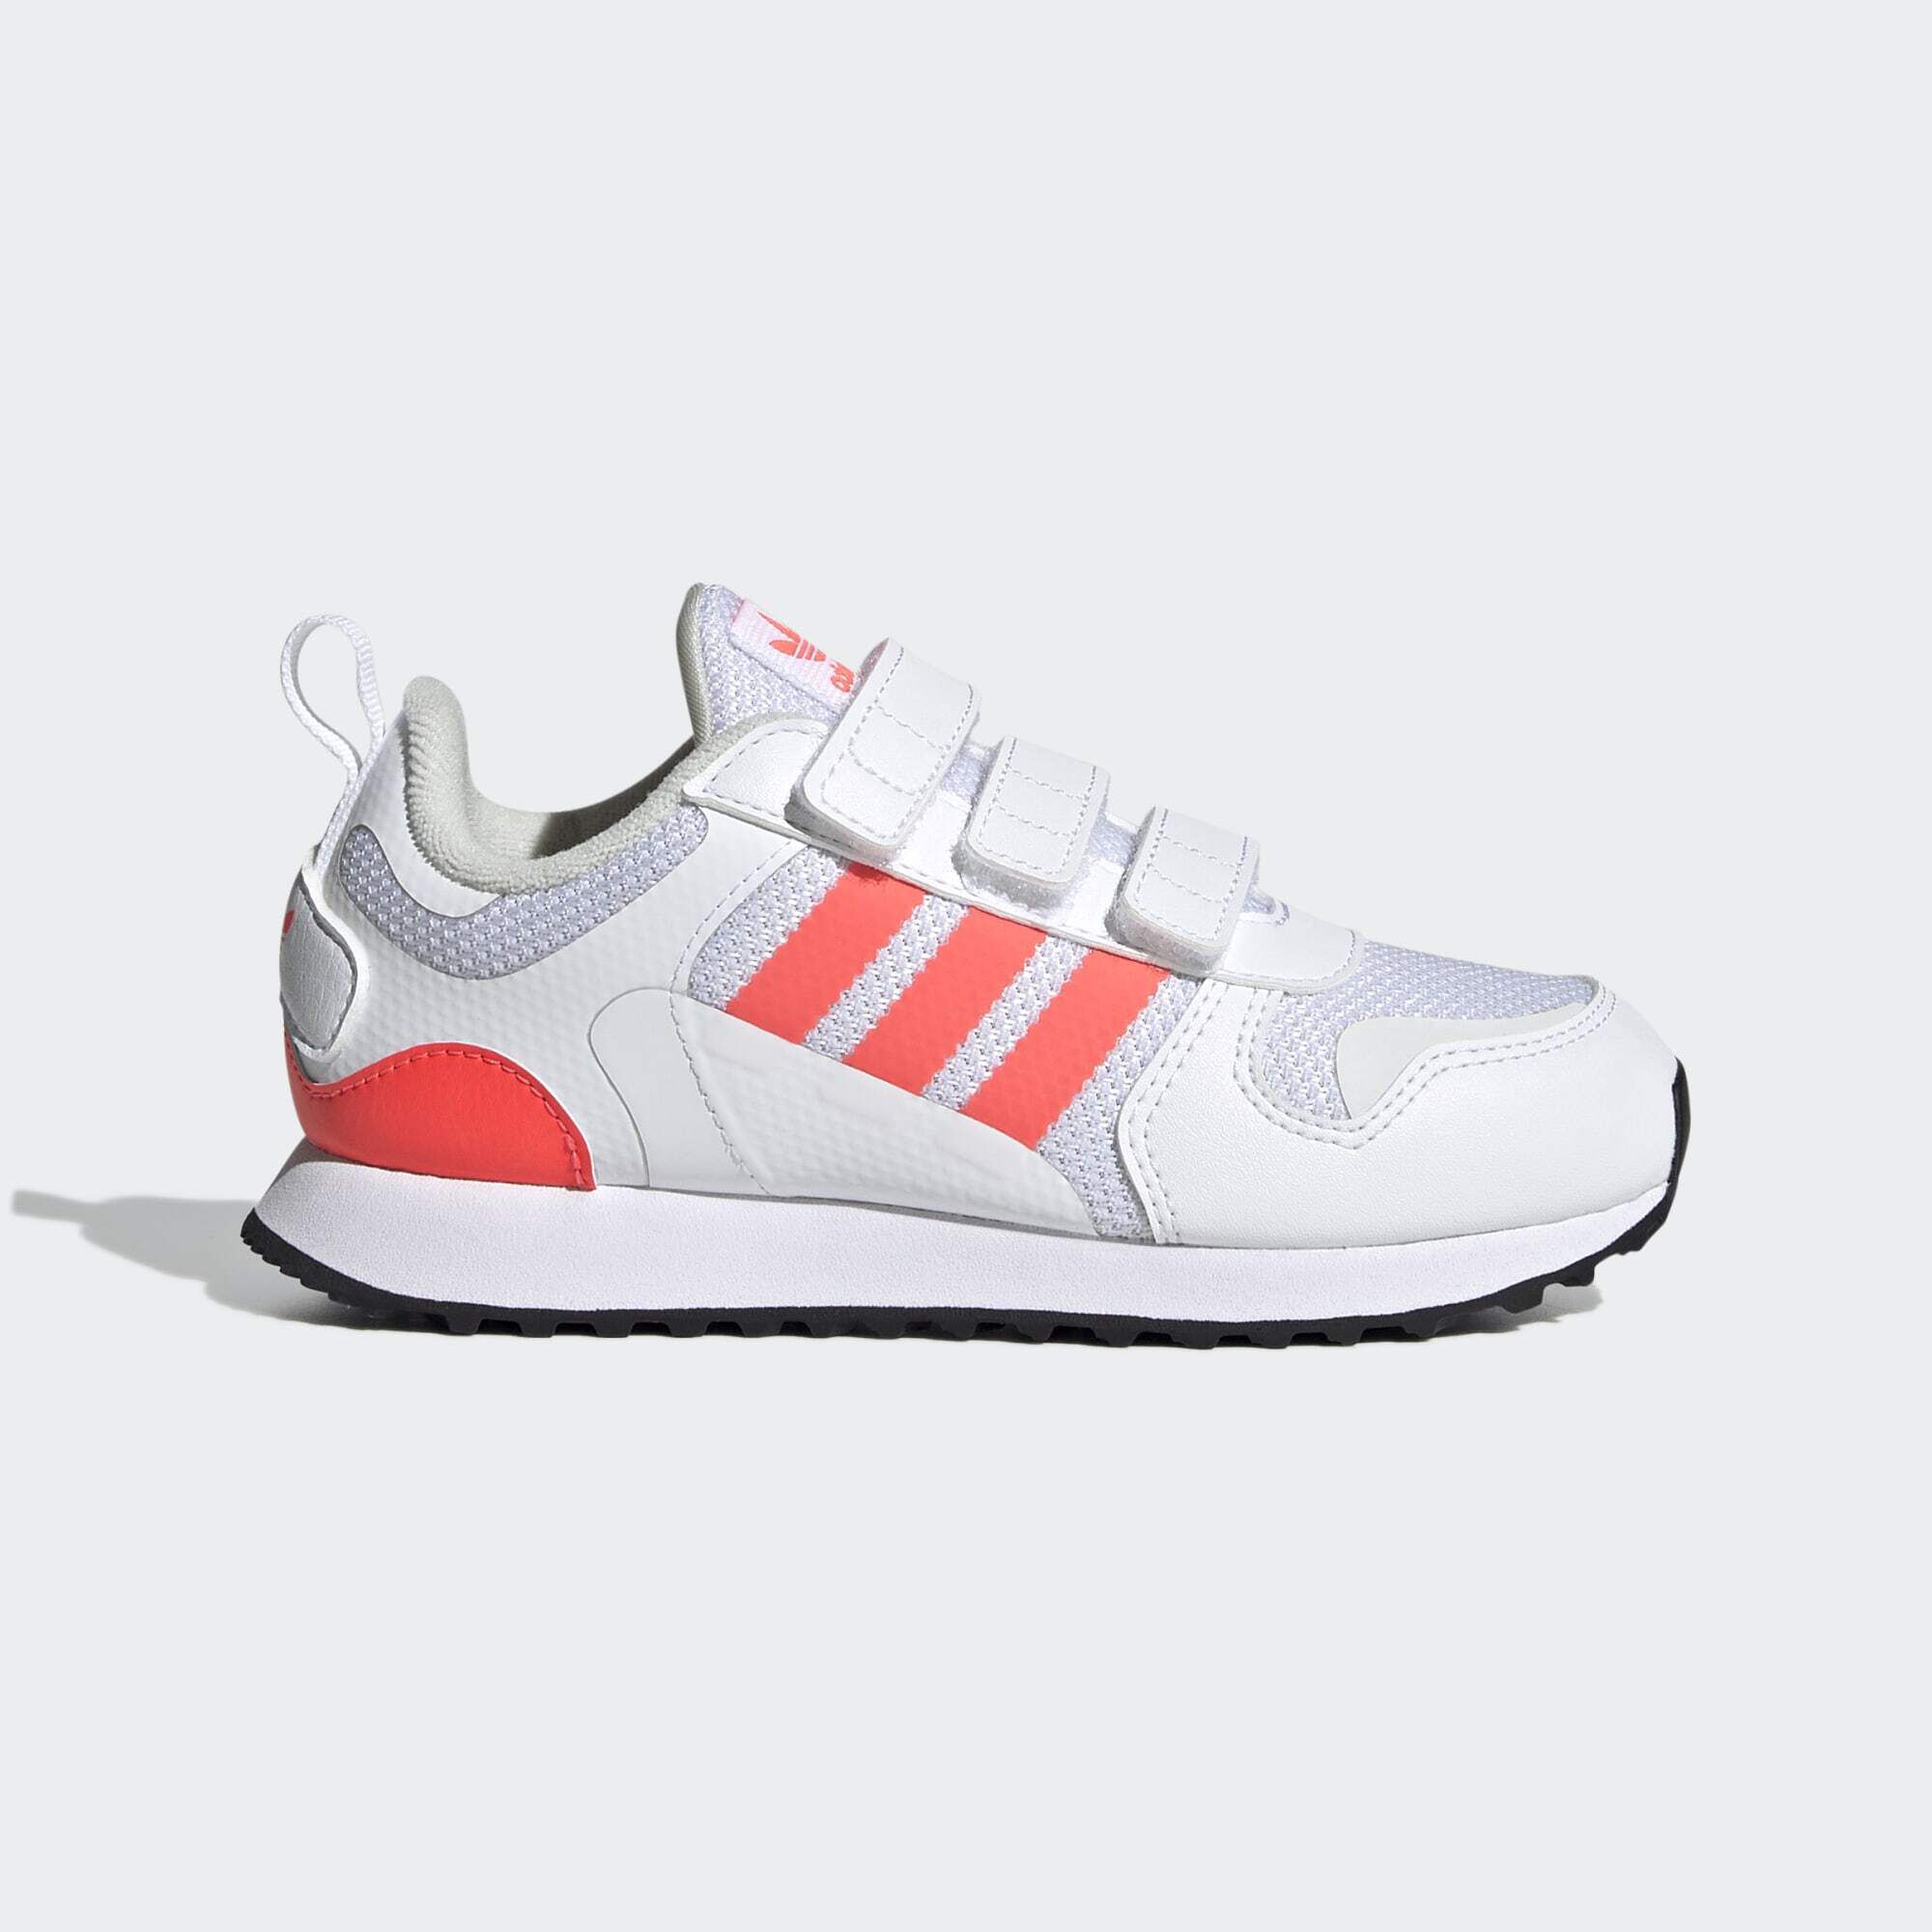 ZX 700 HD SHOES